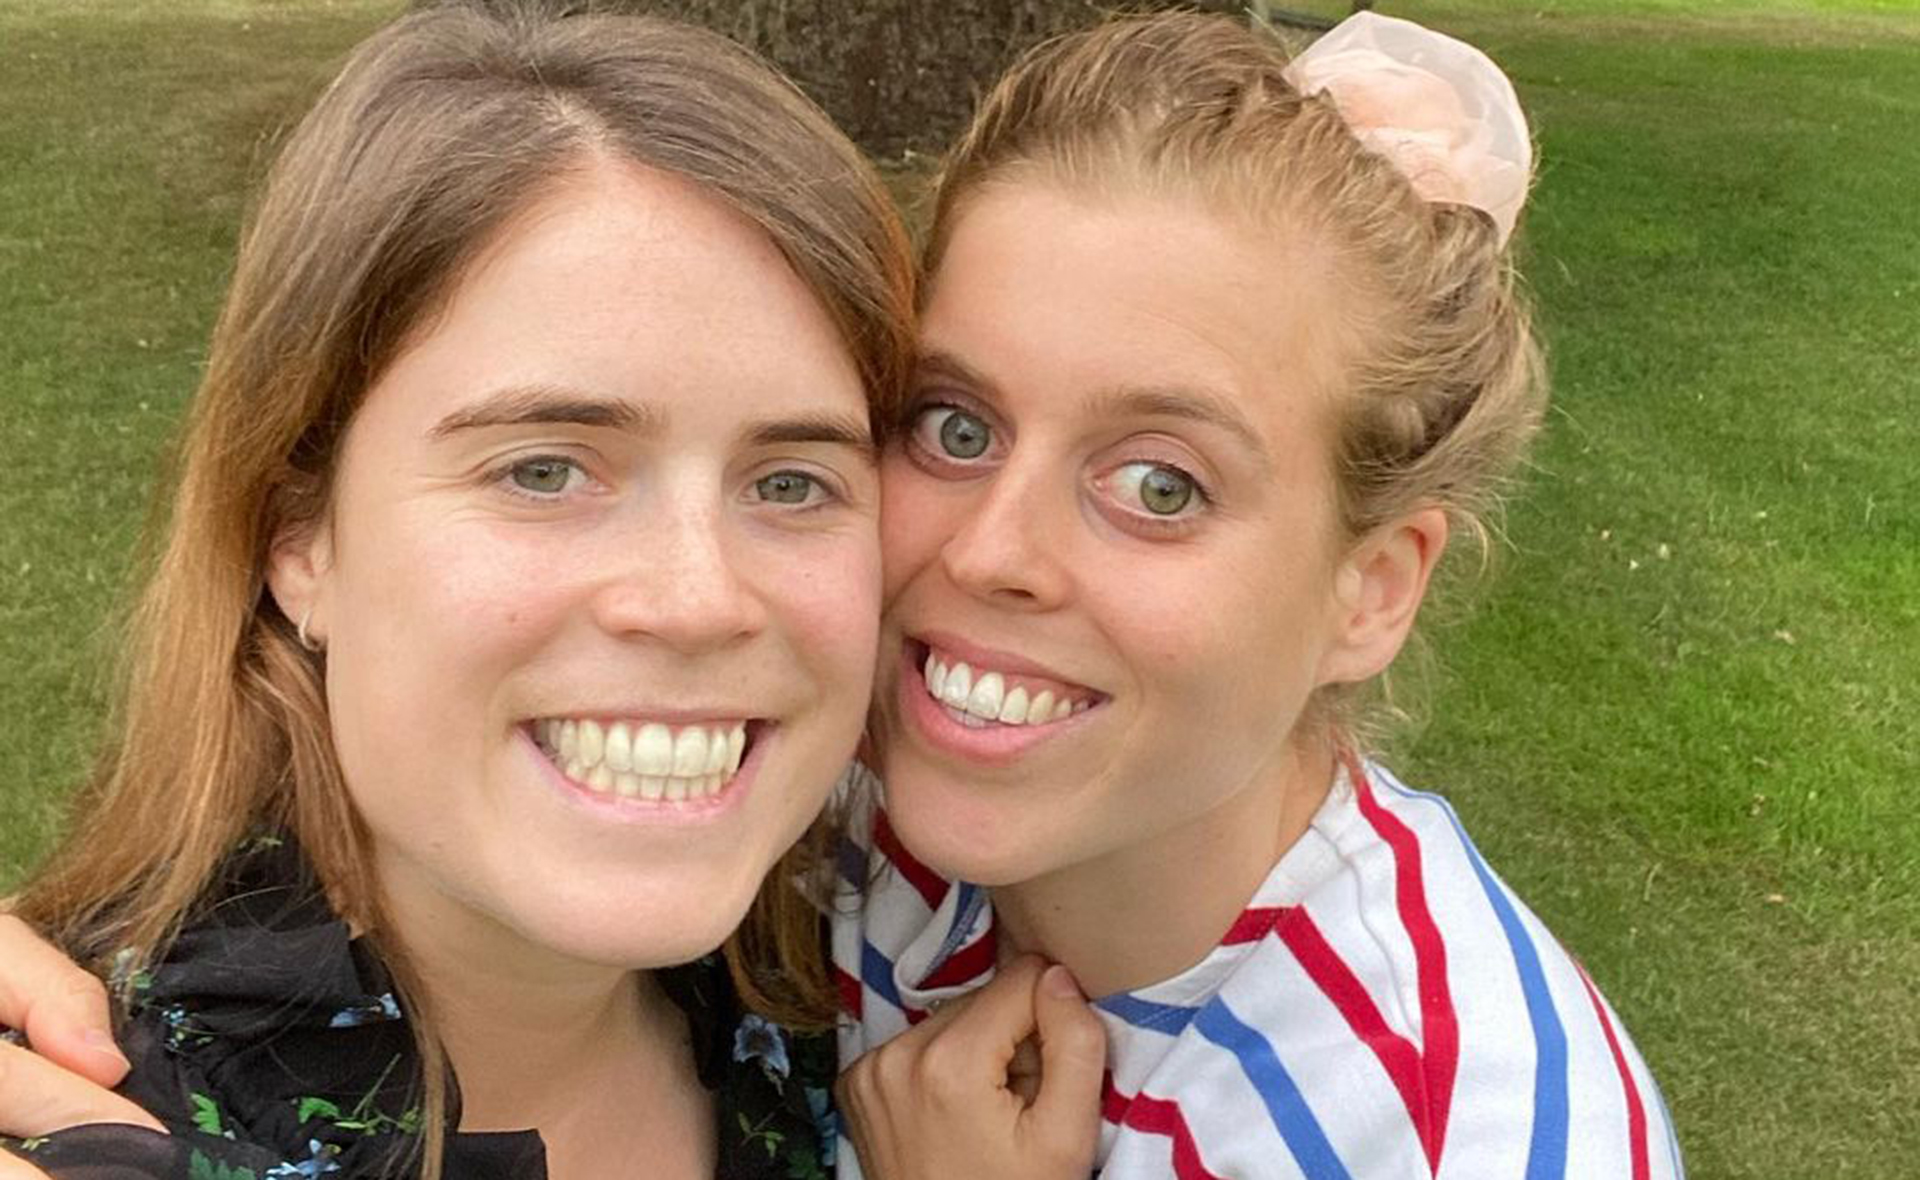 Sister to sister: Inside Princess Beatrice and Eugenie’s incredibly close relationship